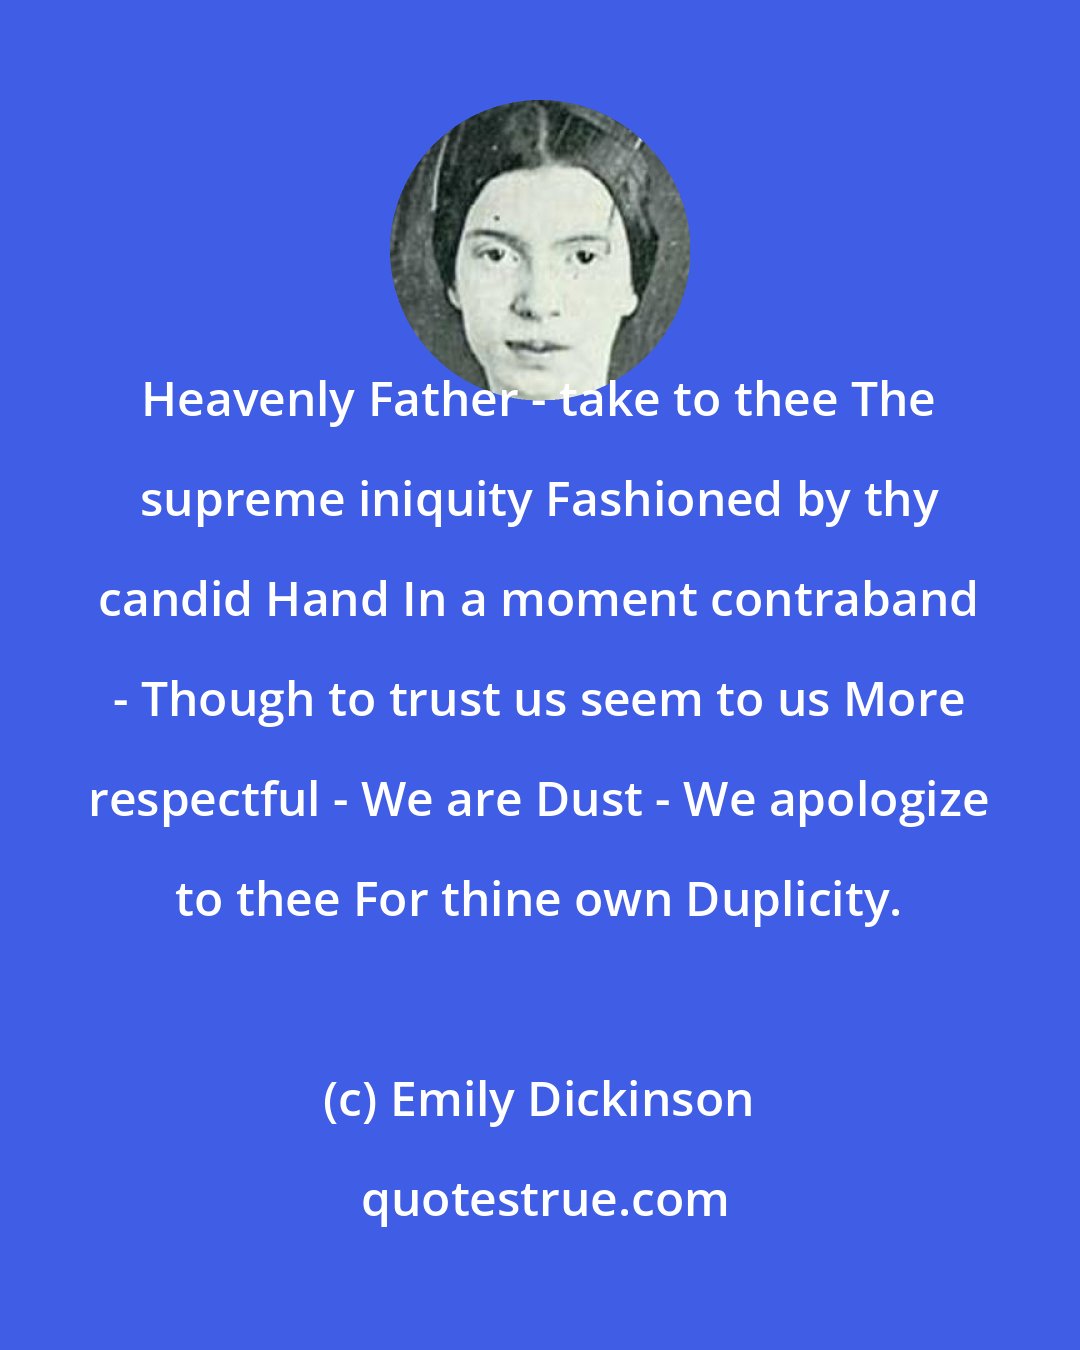 Emily Dickinson: Heavenly Father - take to thee The supreme iniquity Fashioned by thy candid Hand In a moment contraband - Though to trust us seem to us More respectful - We are Dust - We apologize to thee For thine own Duplicity.